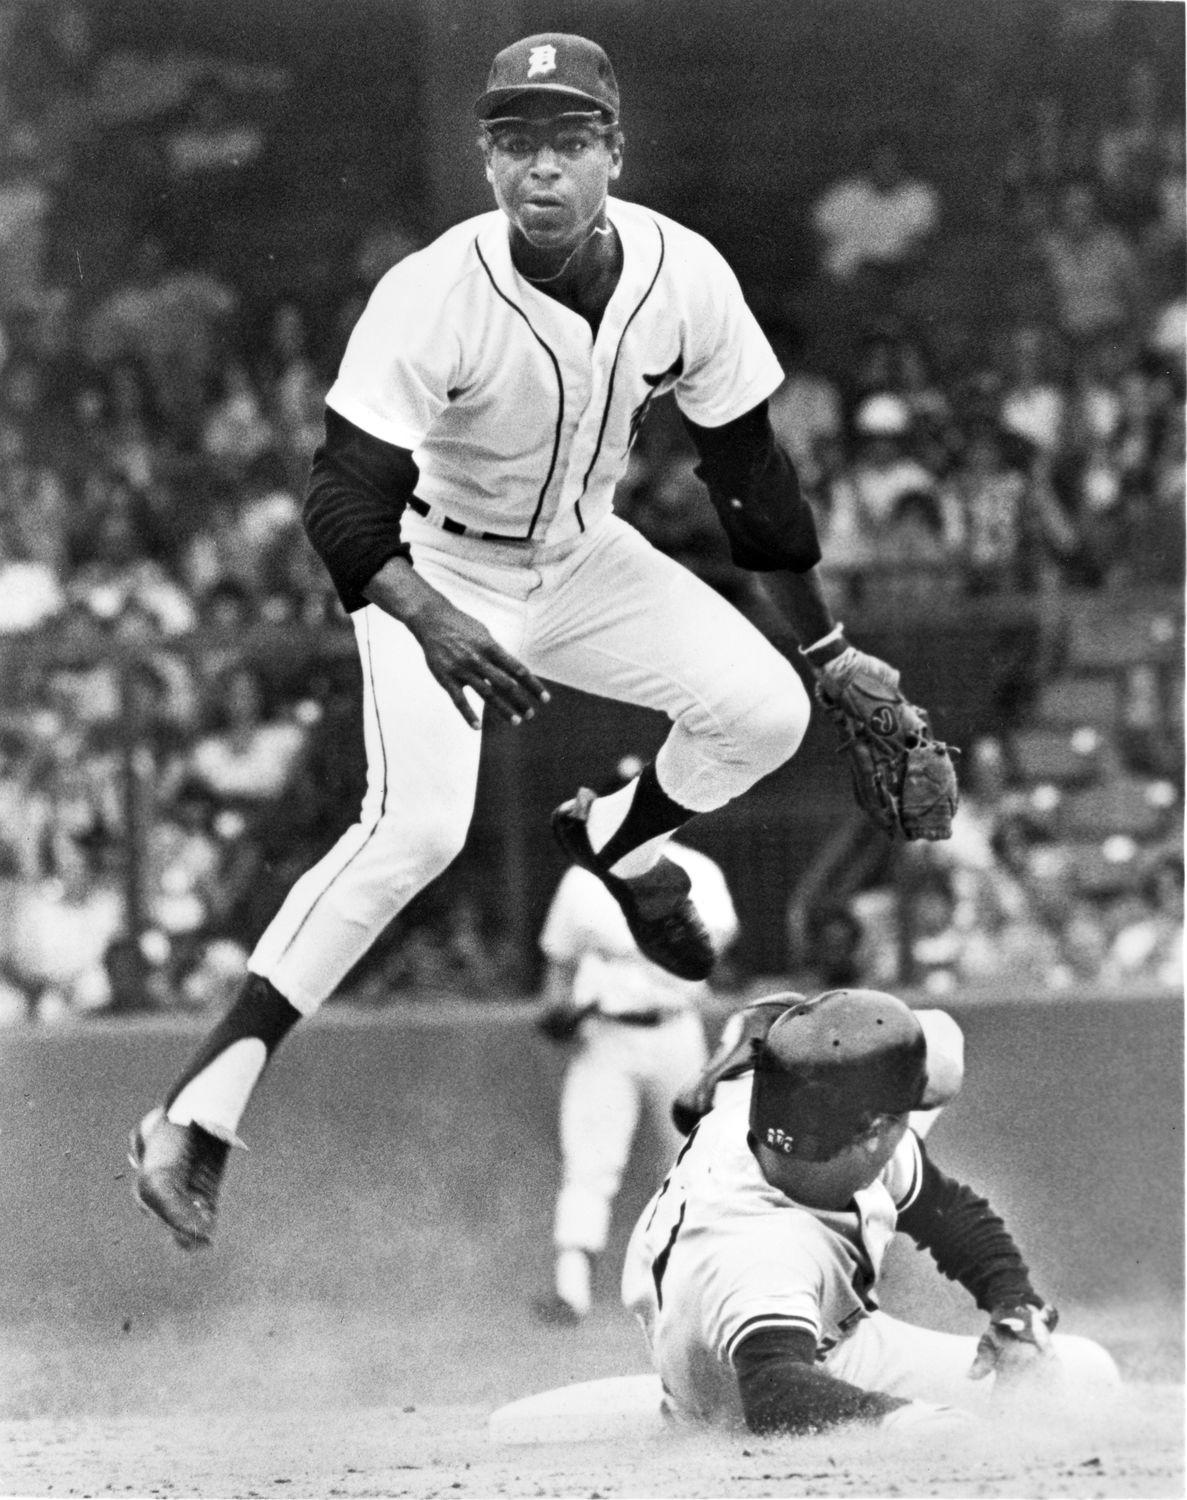 Right or wrong, the Hall of Fame remains elusive for Lou Whitaker